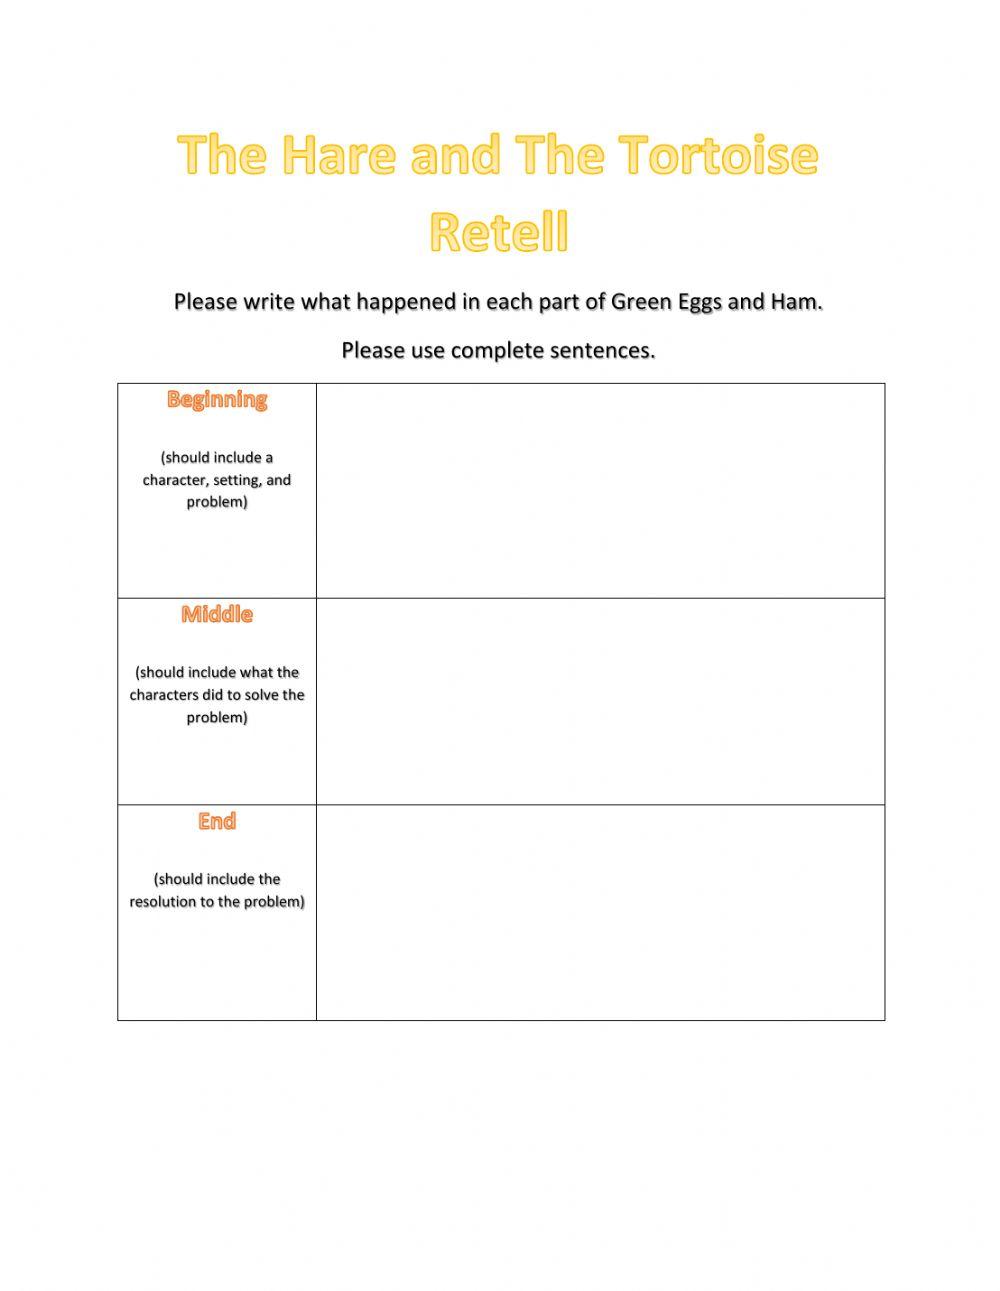 The Hare and the Tortoise Retell